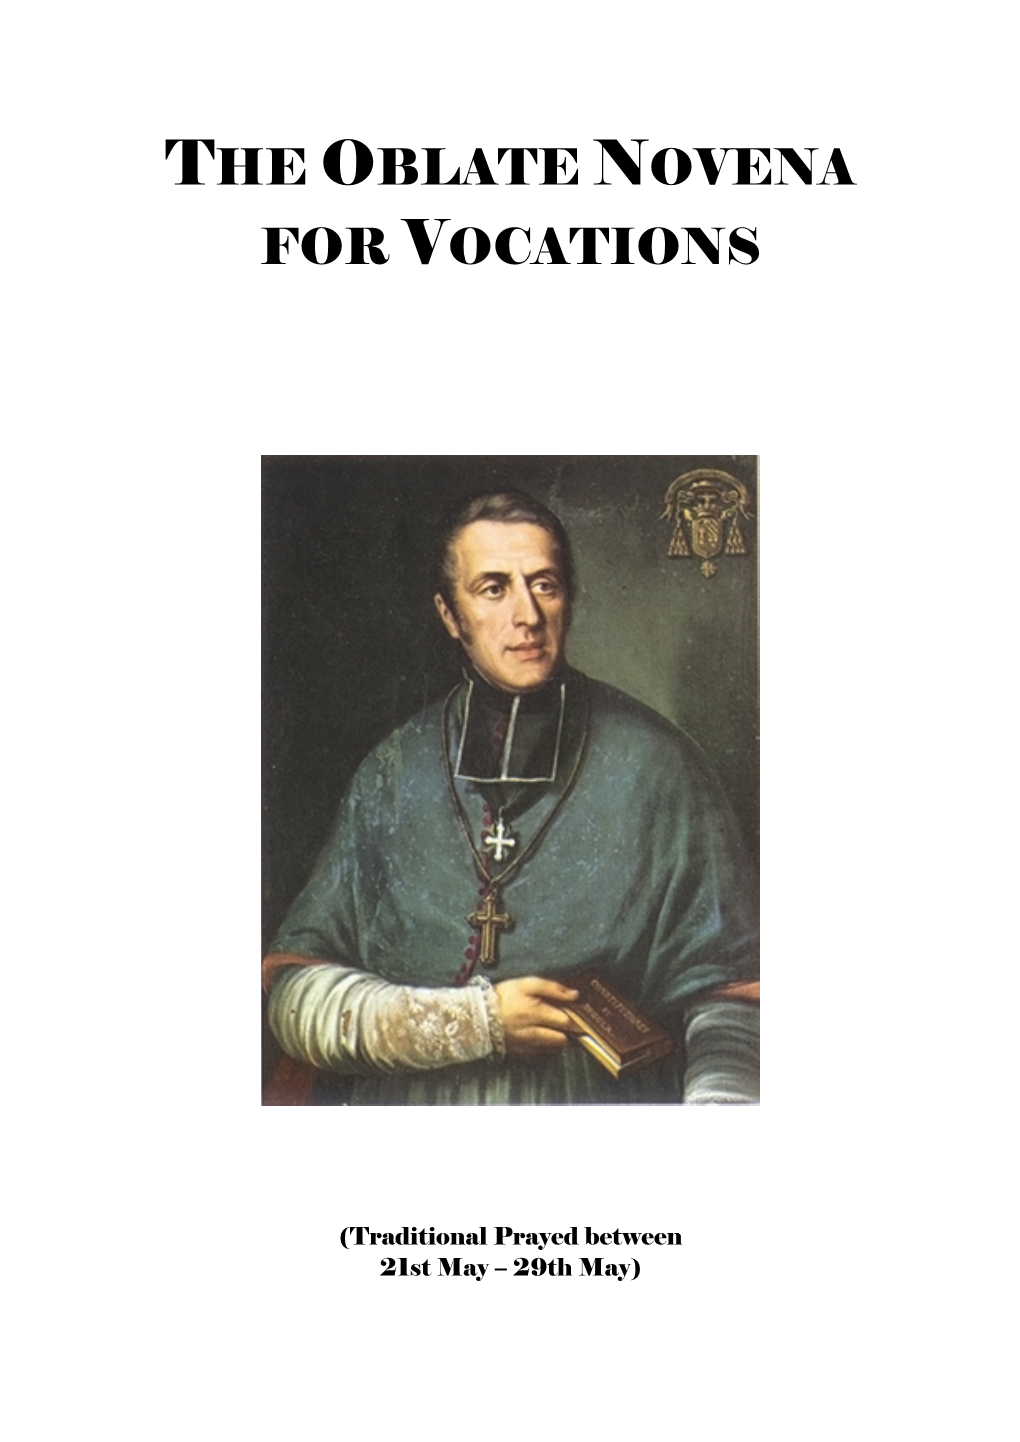 The Oblate Novena for Vocations